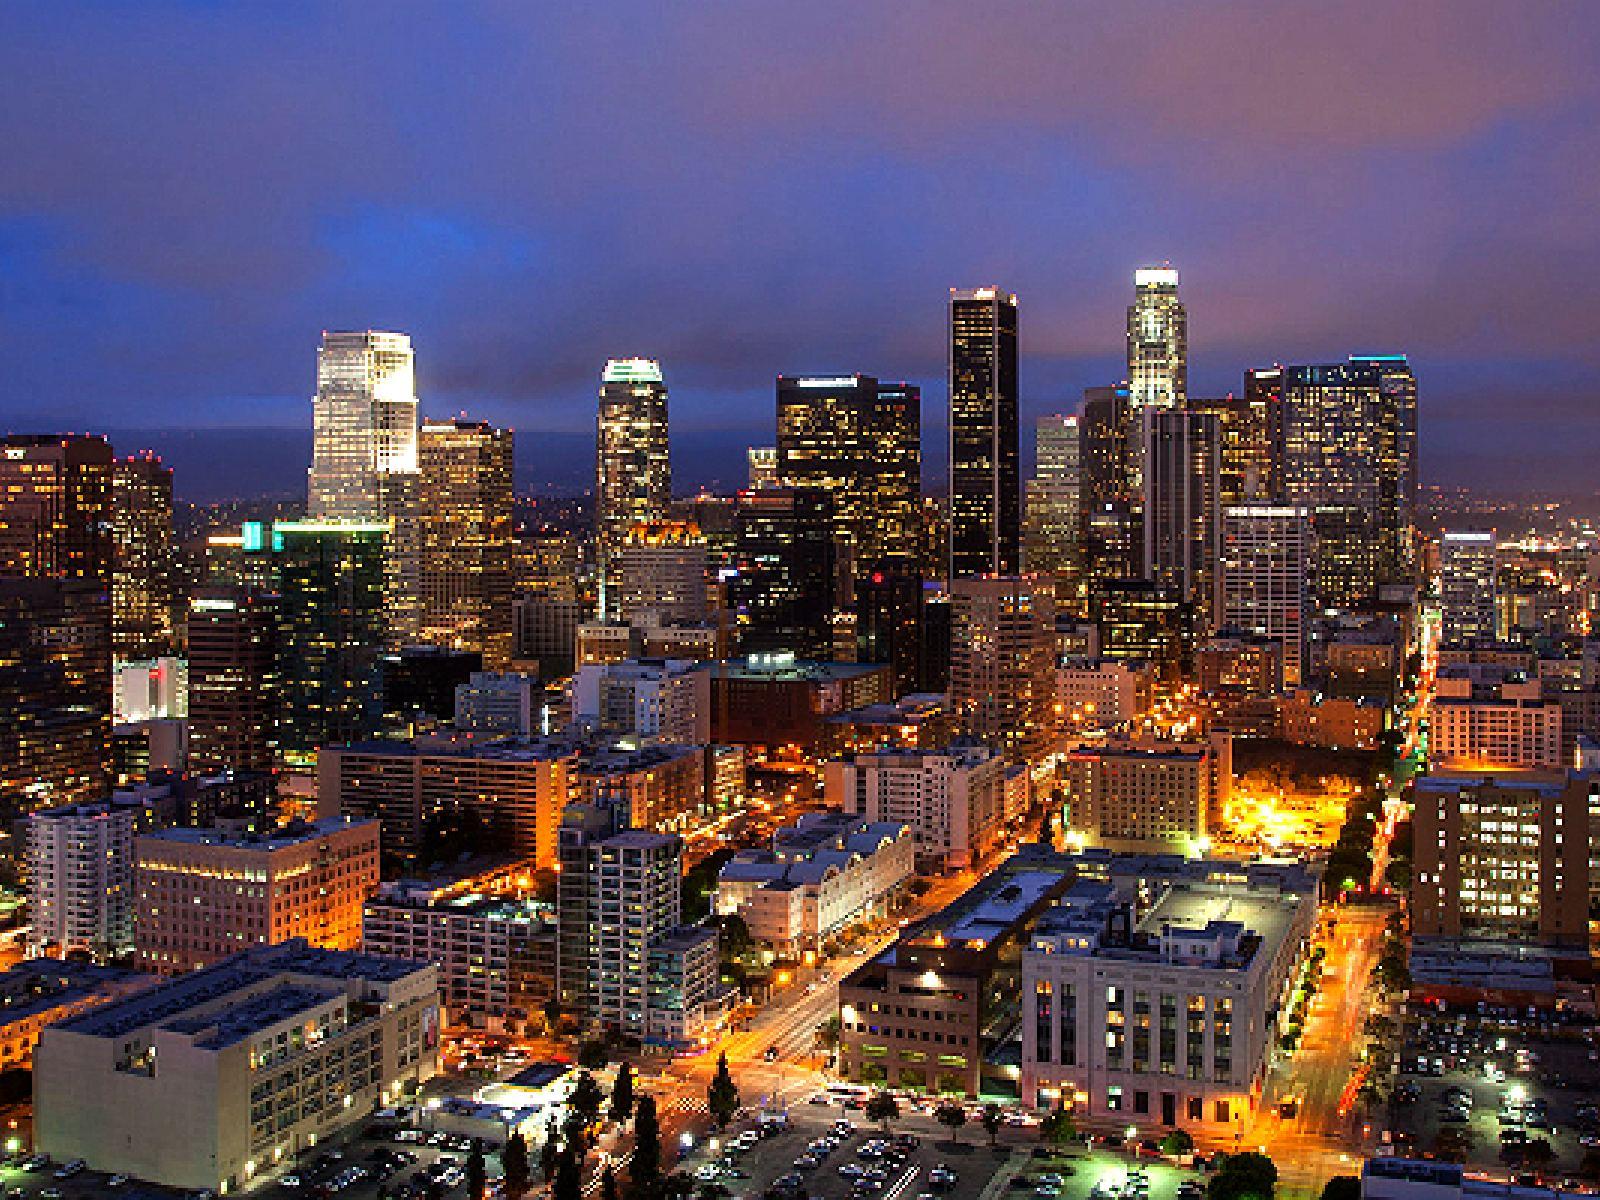 DTLA Walking Tour - Speakeasies, Rooftop Bars, Historic Tours and More!